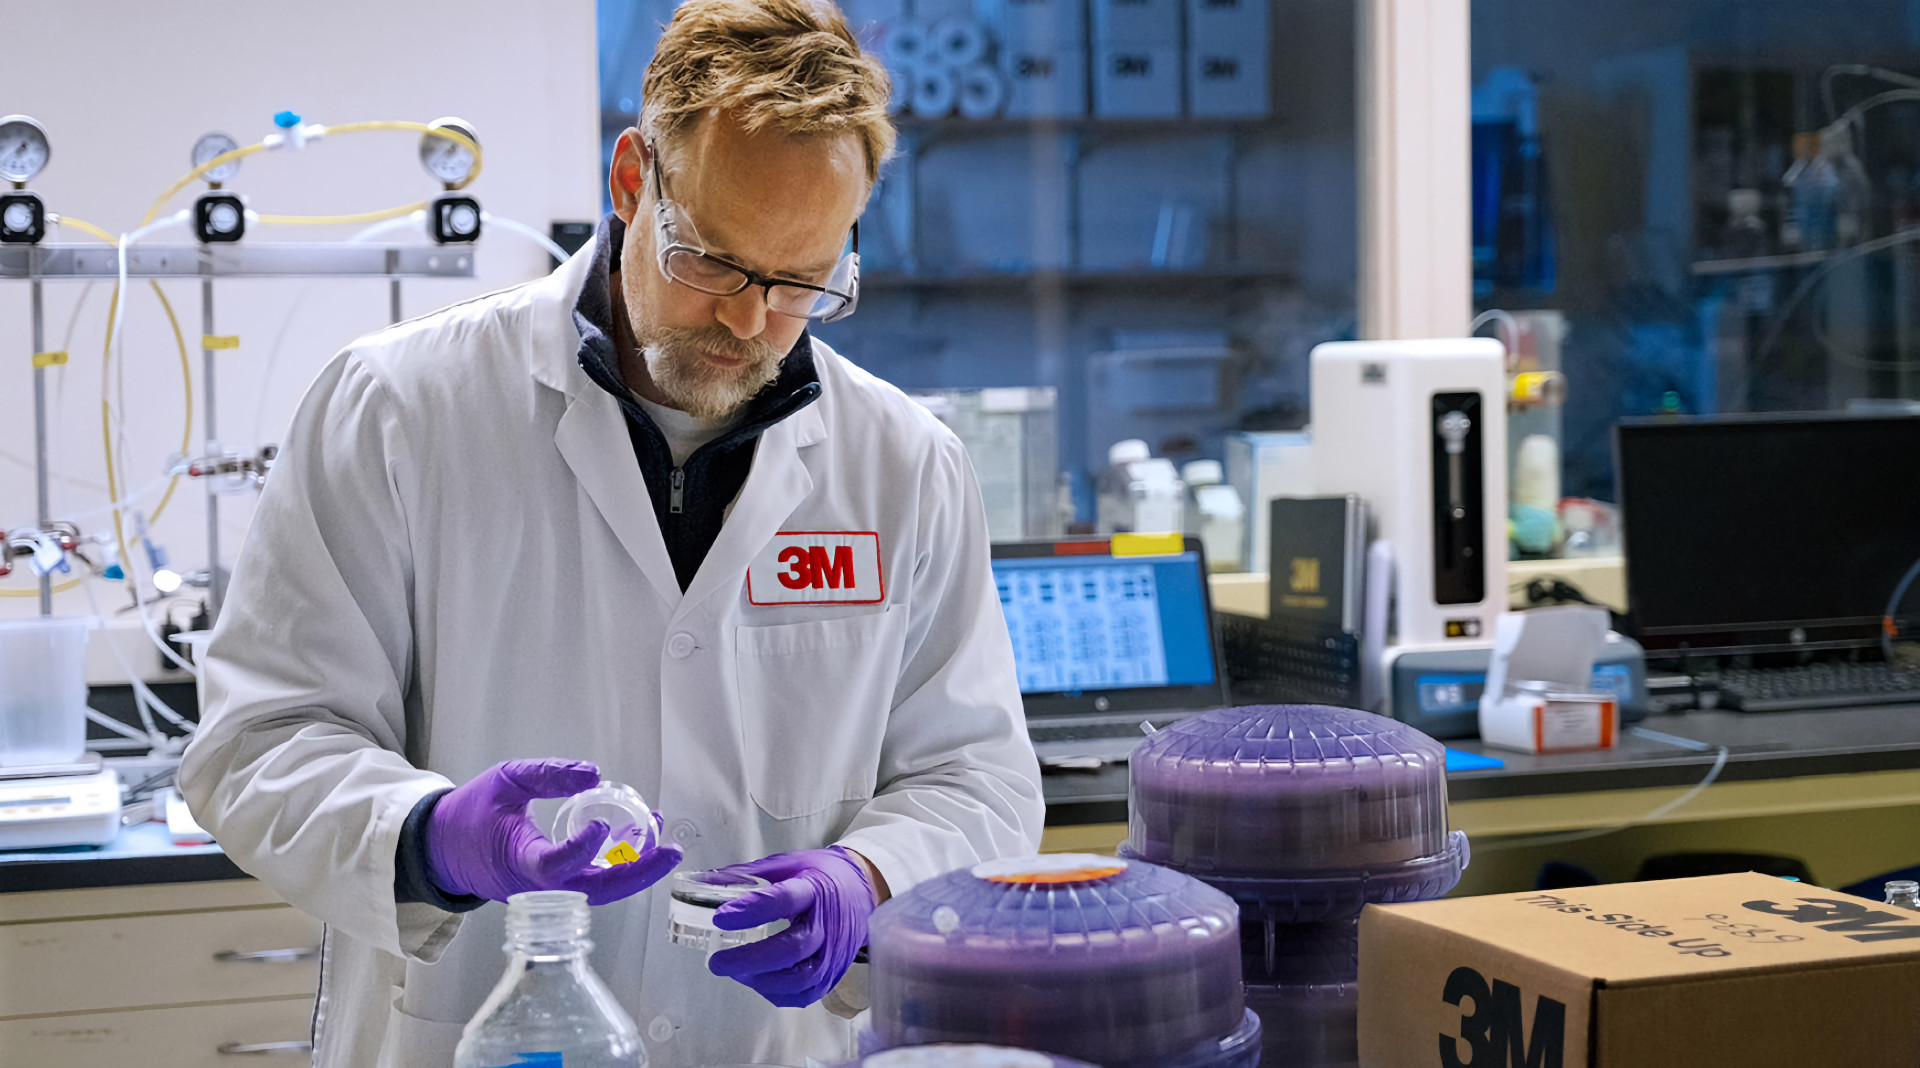 3M Reveals Top 2022 Trends In Science, Technology And Design